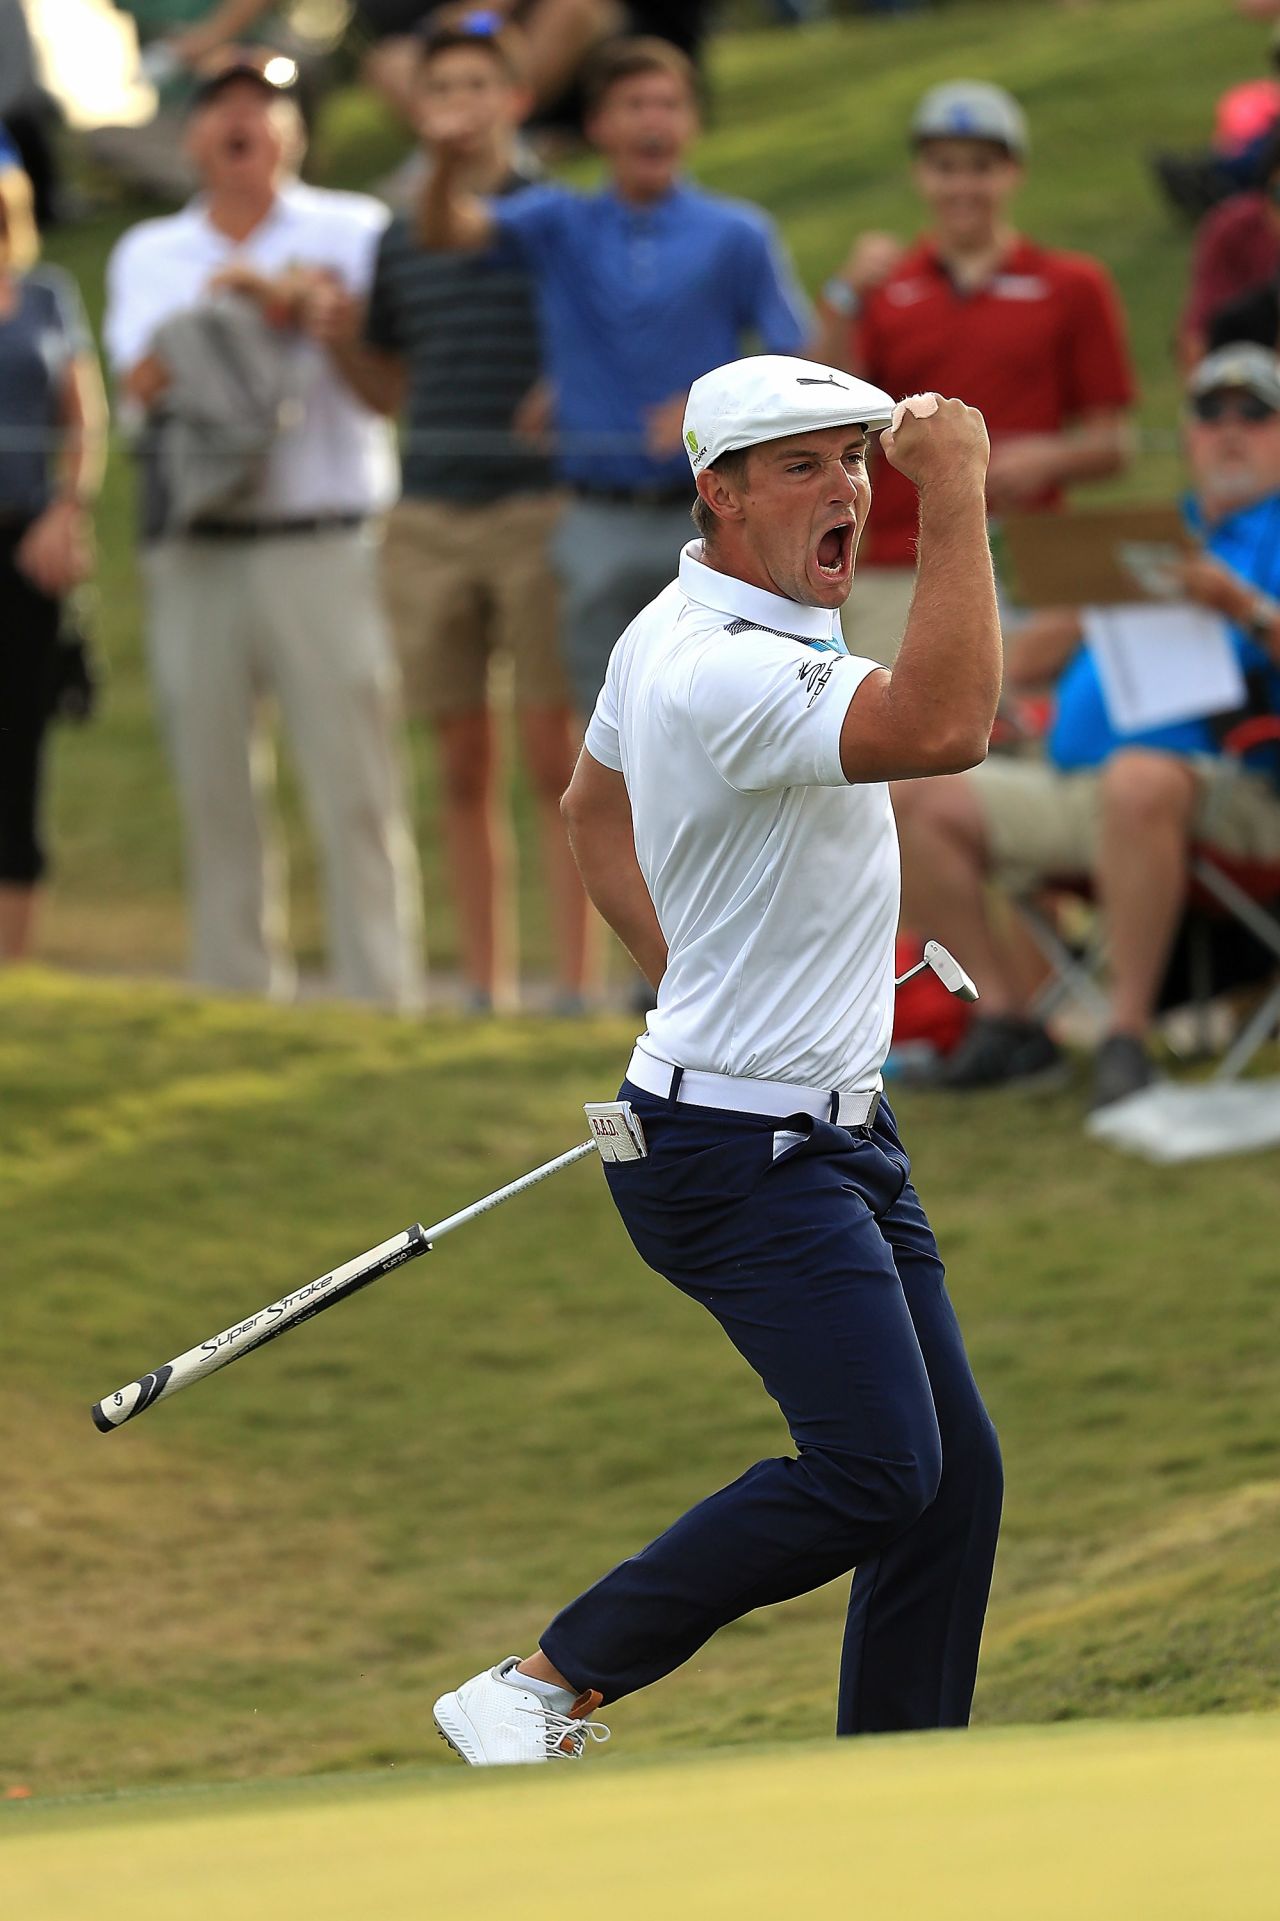 Yet even the best have struggled with Canesi's unorthodox equipment. When Bryson DeChambeau tried out Canesi's 58-inch driver at the 2018 Shriners Children's Open, the big-hitting American missed the ball completely. It didn't affect him too much though, as DeChambeau went on to win the event (pictured).